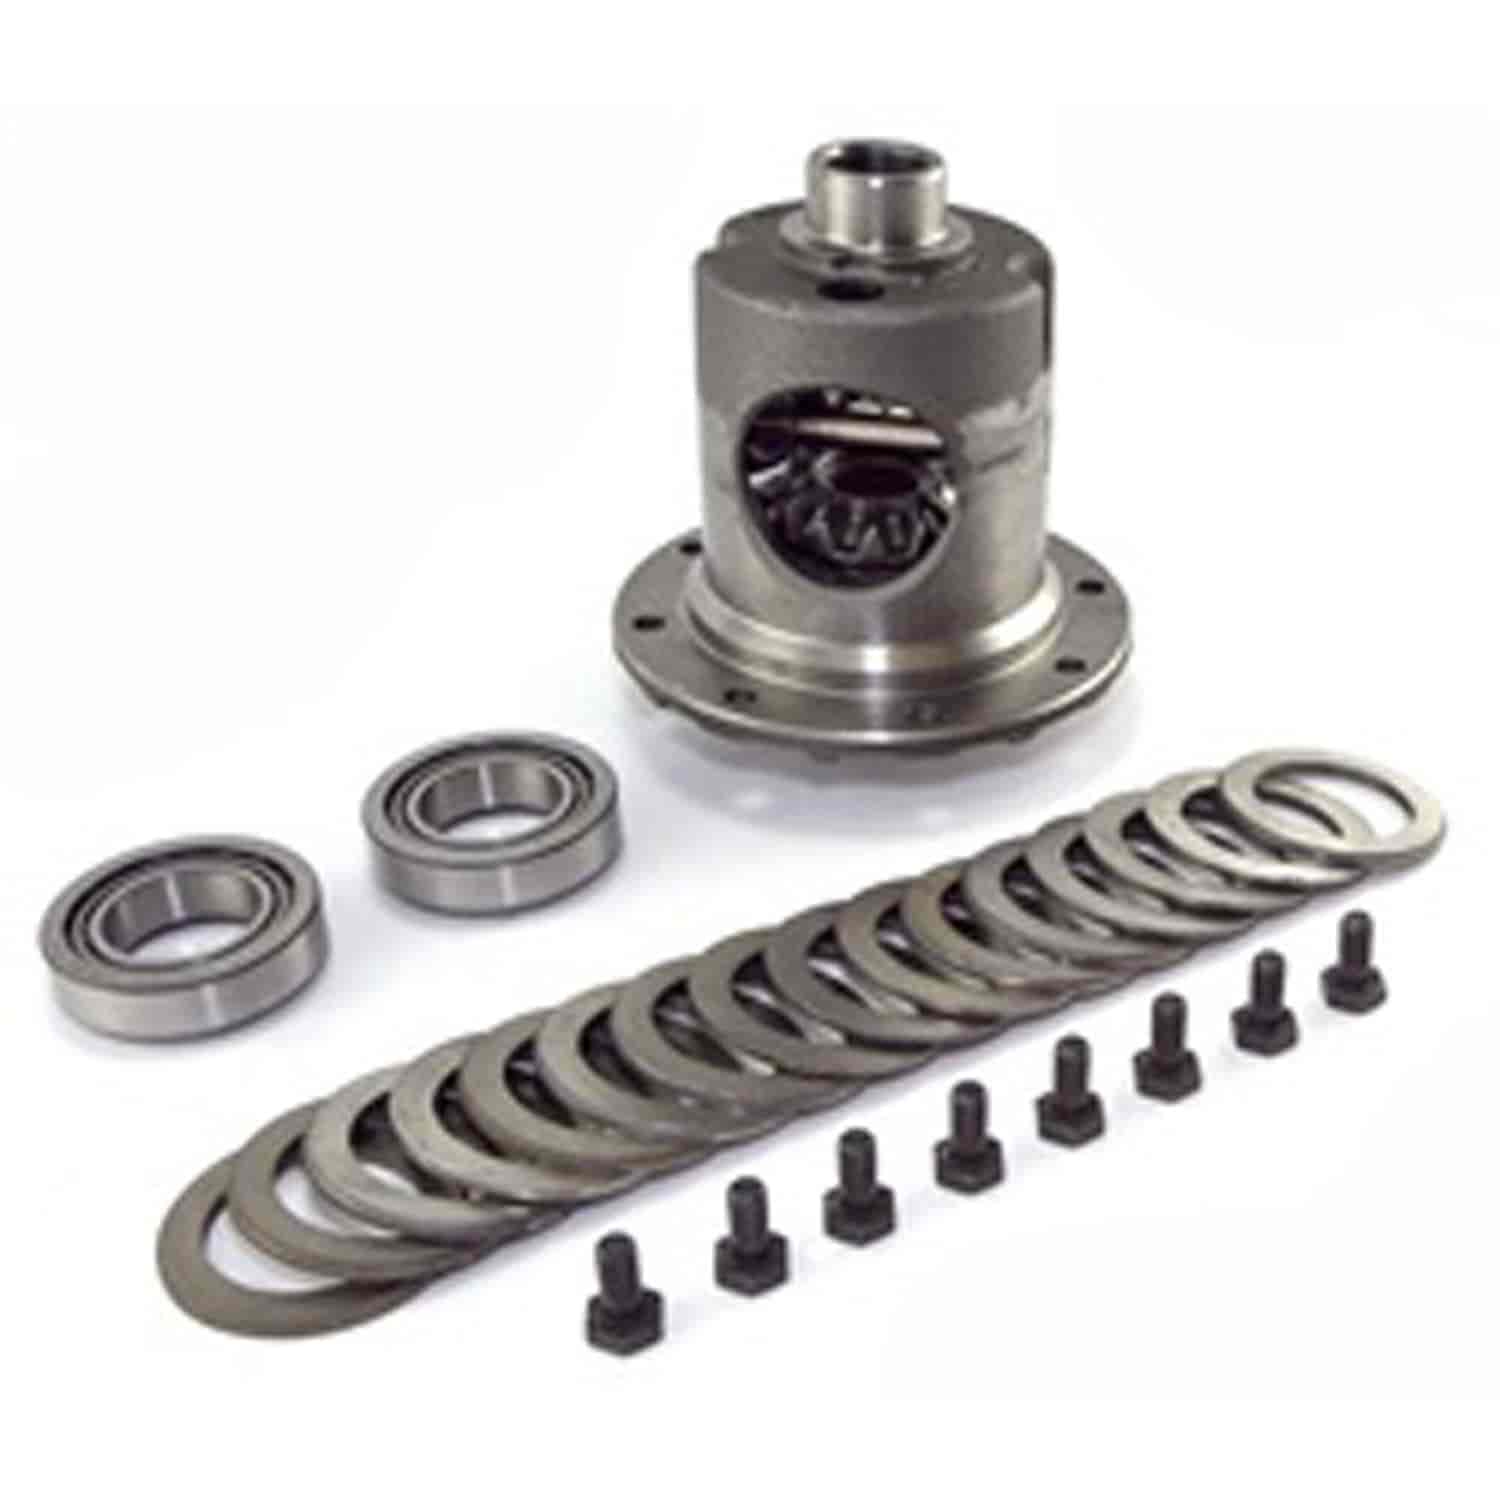 This differential carrier assembly from Omix-ADA fits Jeep Wrangler Cherokees and Grand Cherokees with Dana 35 Trac-Loc.